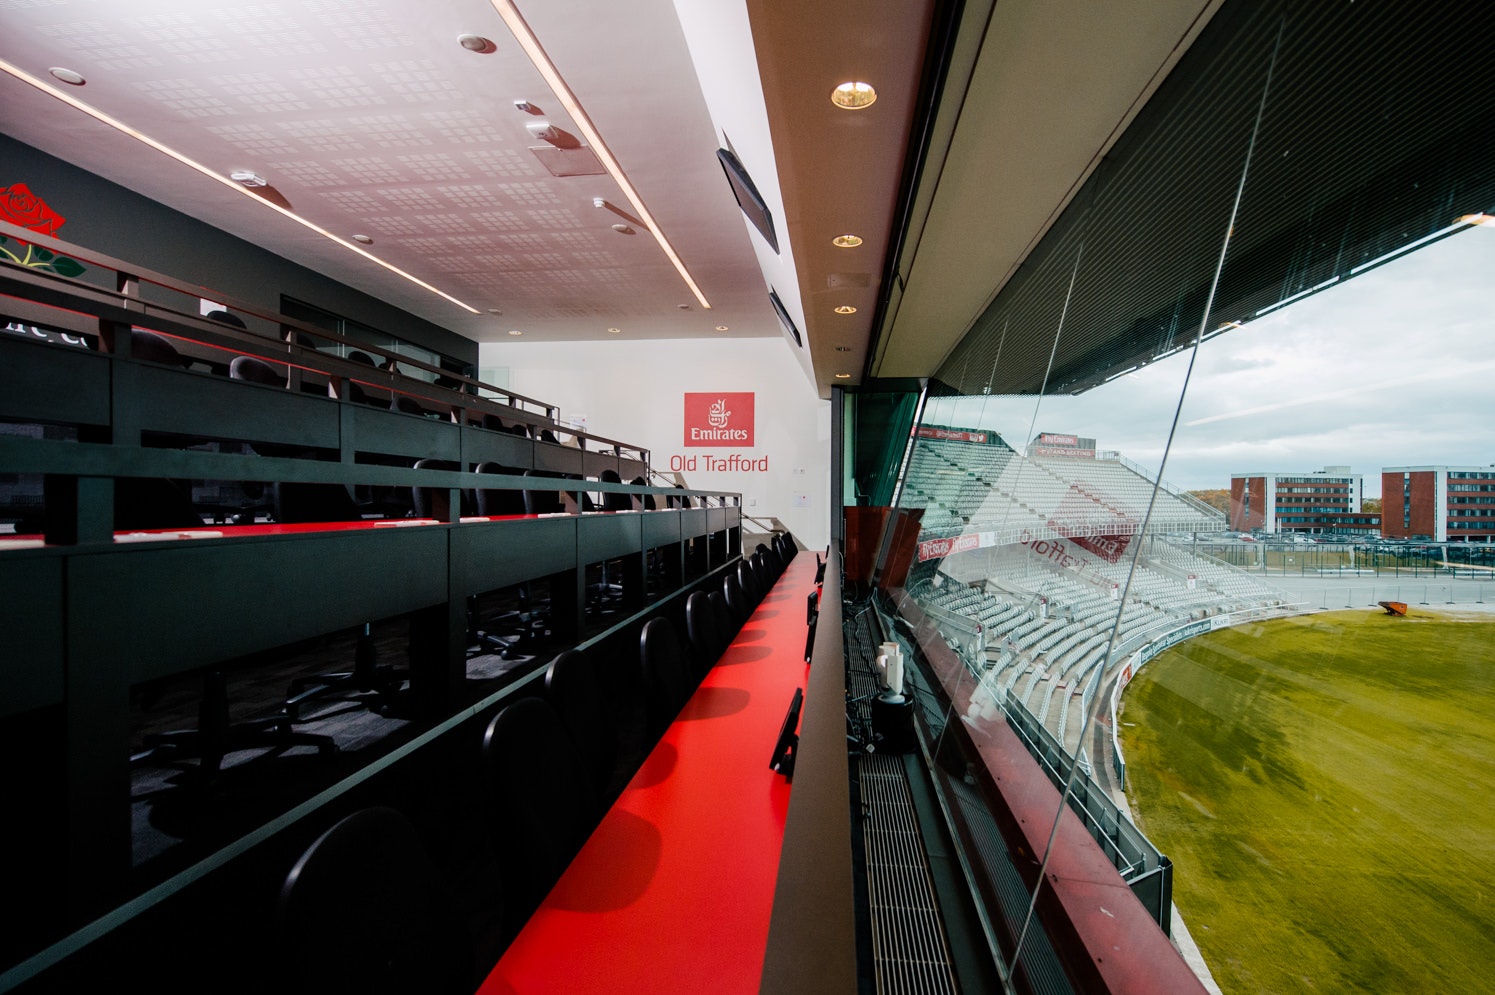 Emirates Old Trafford  - Press Gallery image 2